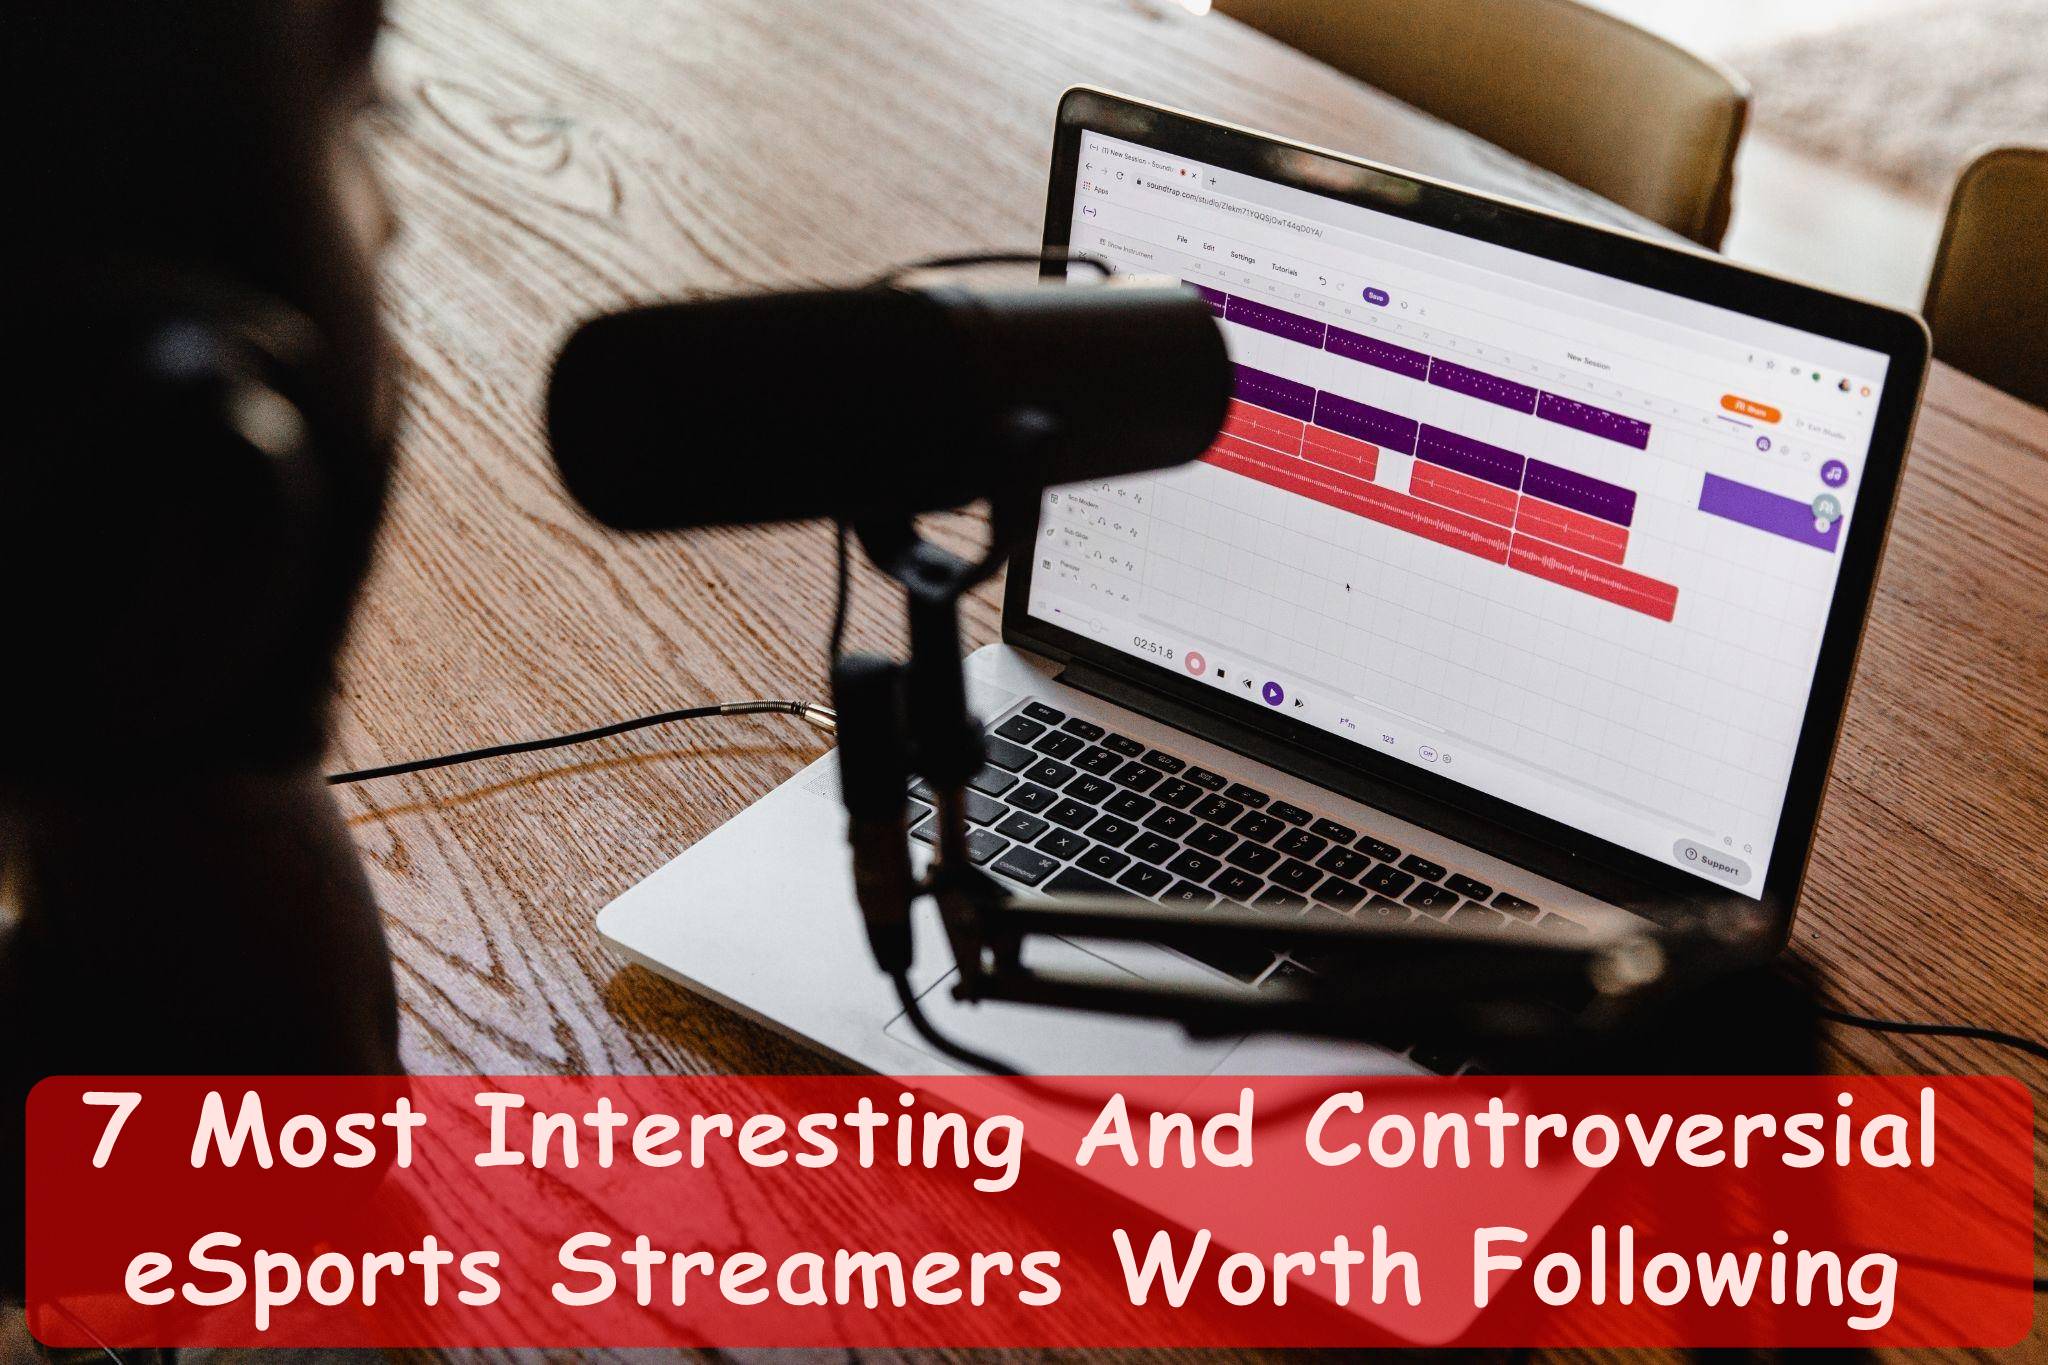 7 Most Interesting And Controversial eSports Streamers Worth Following